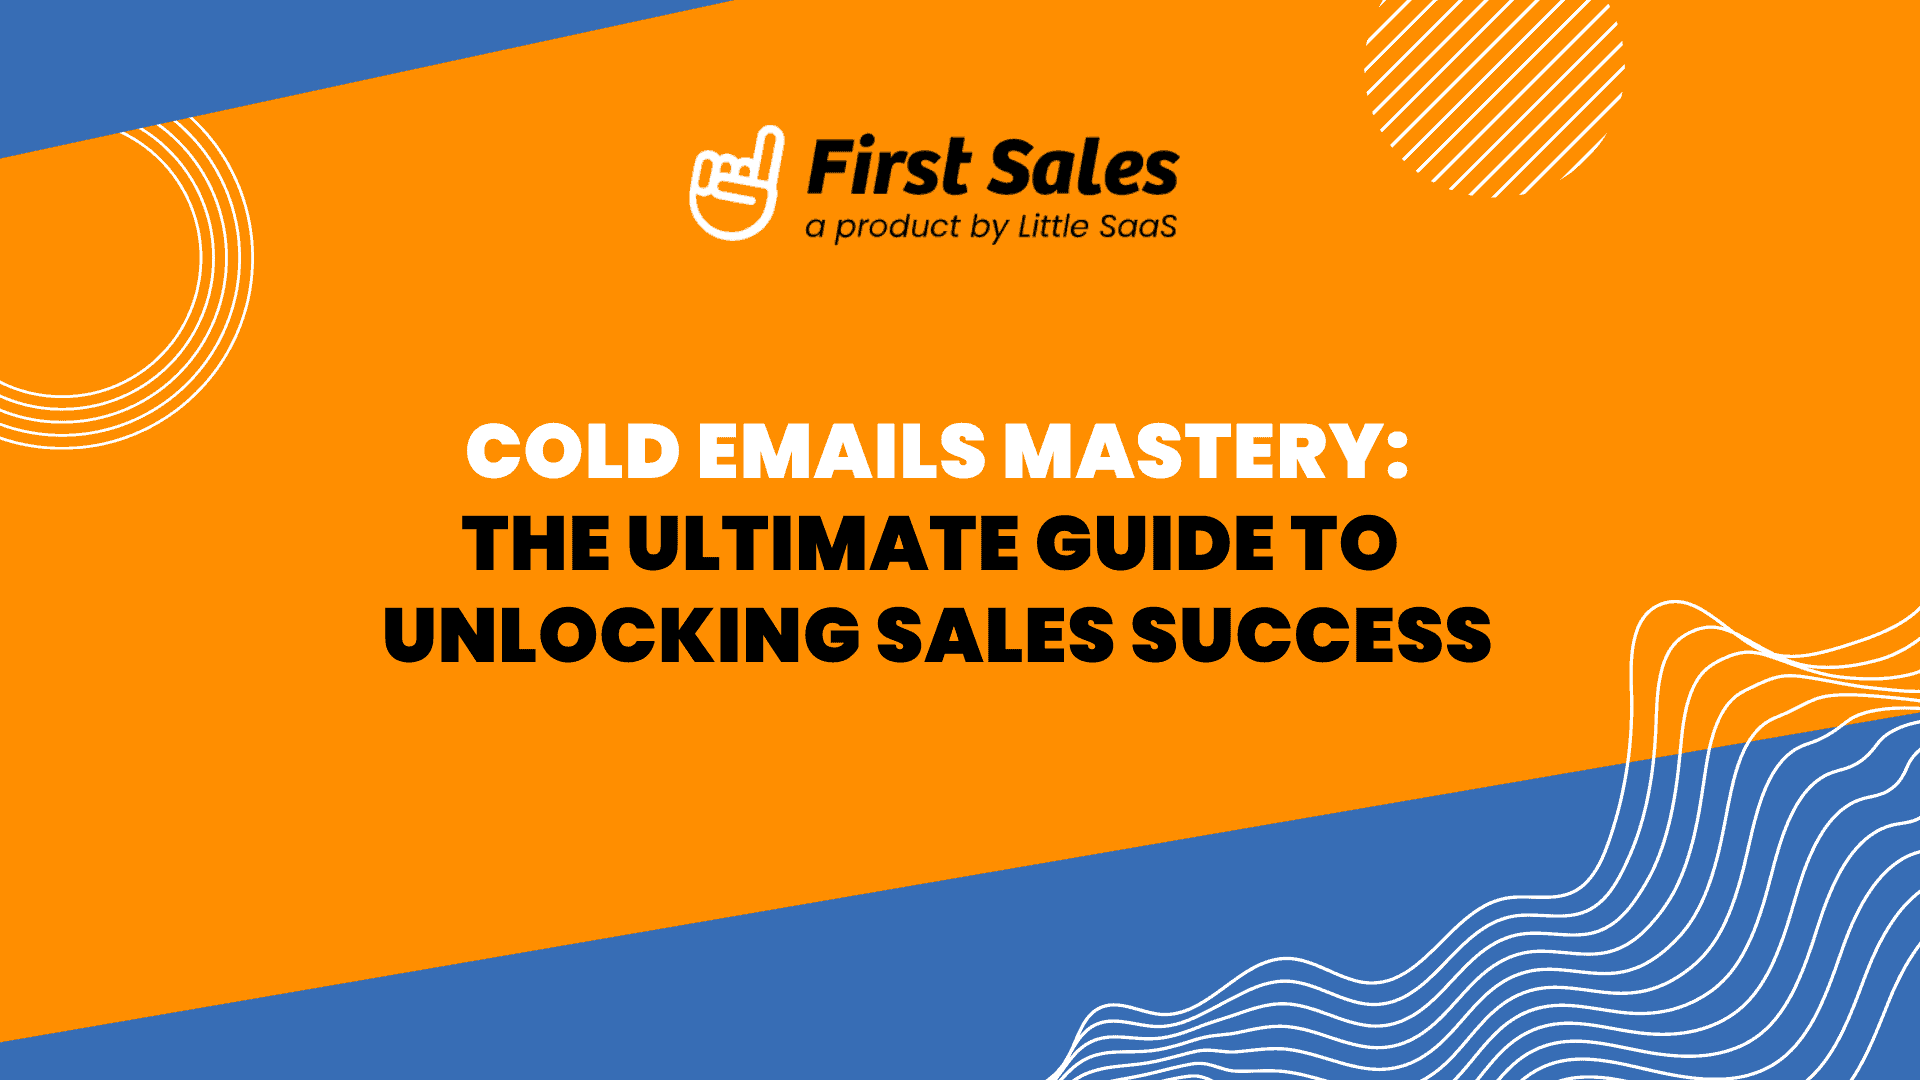 Cold Emails Mastery: The Ultimate Guide to Unlocking Sales Success